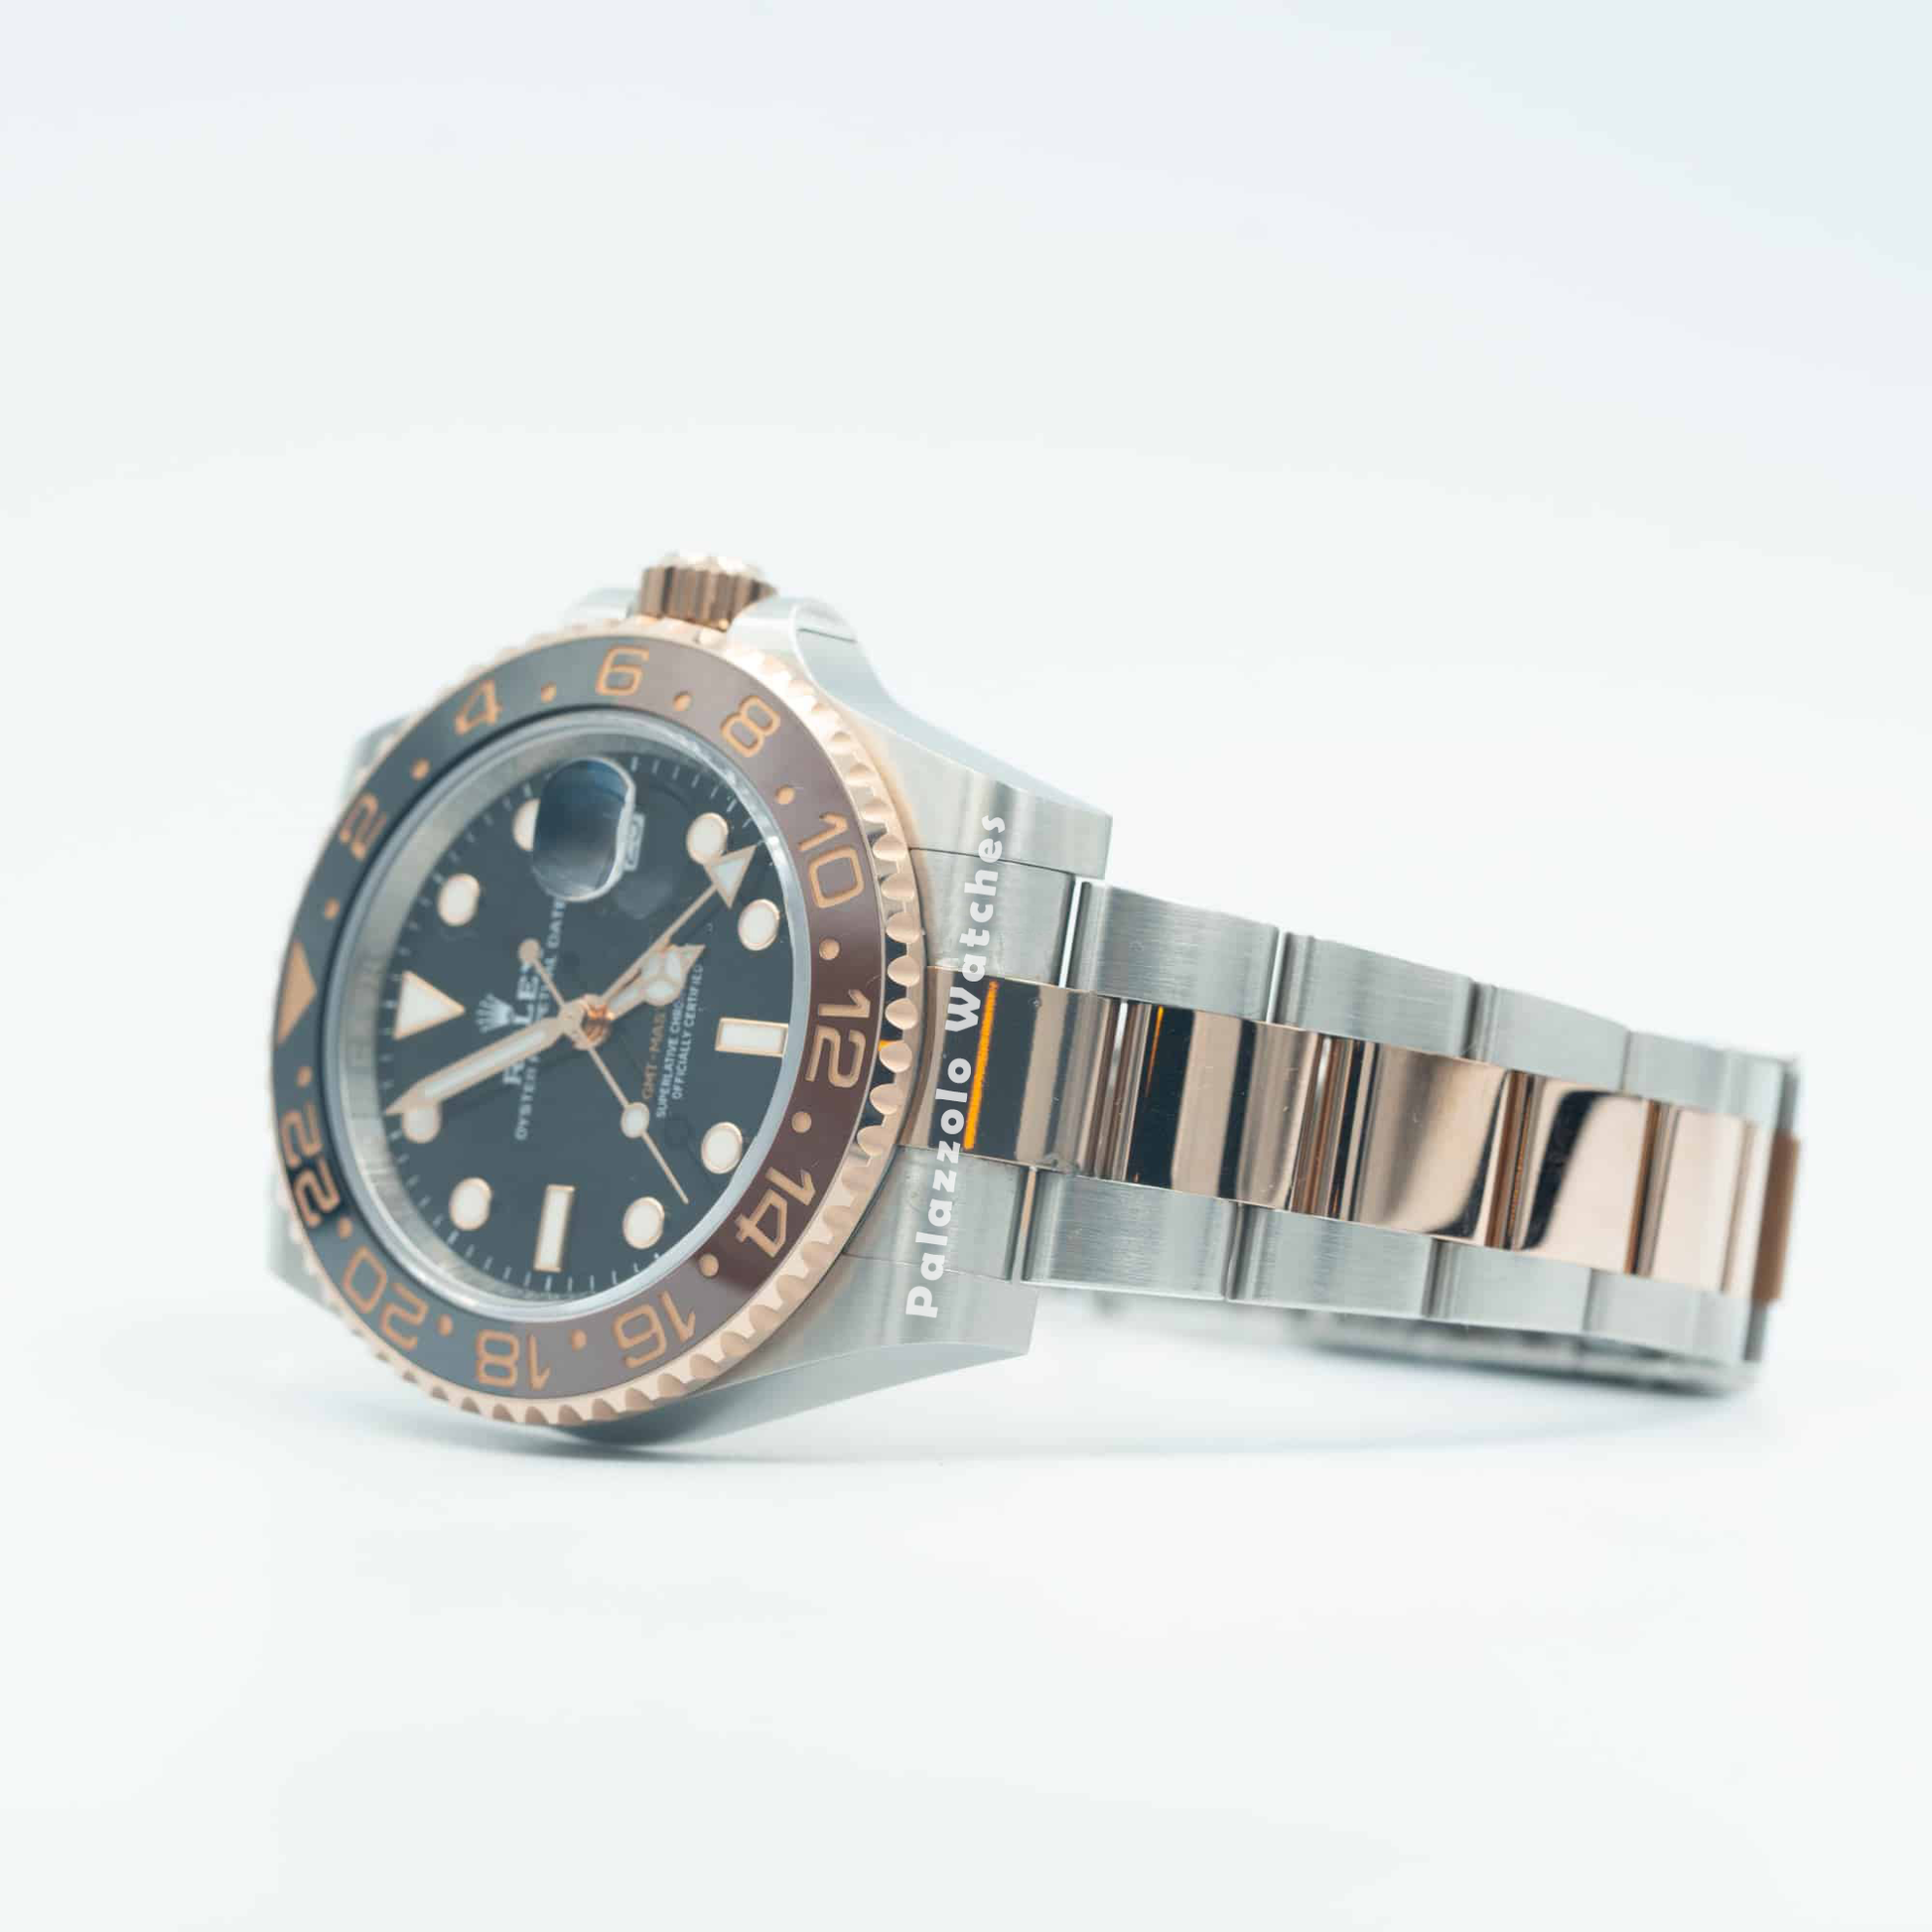 Rolex GMT Master II 'Rootbeer' Ref. 126711CHNR - Palazzolo Watches